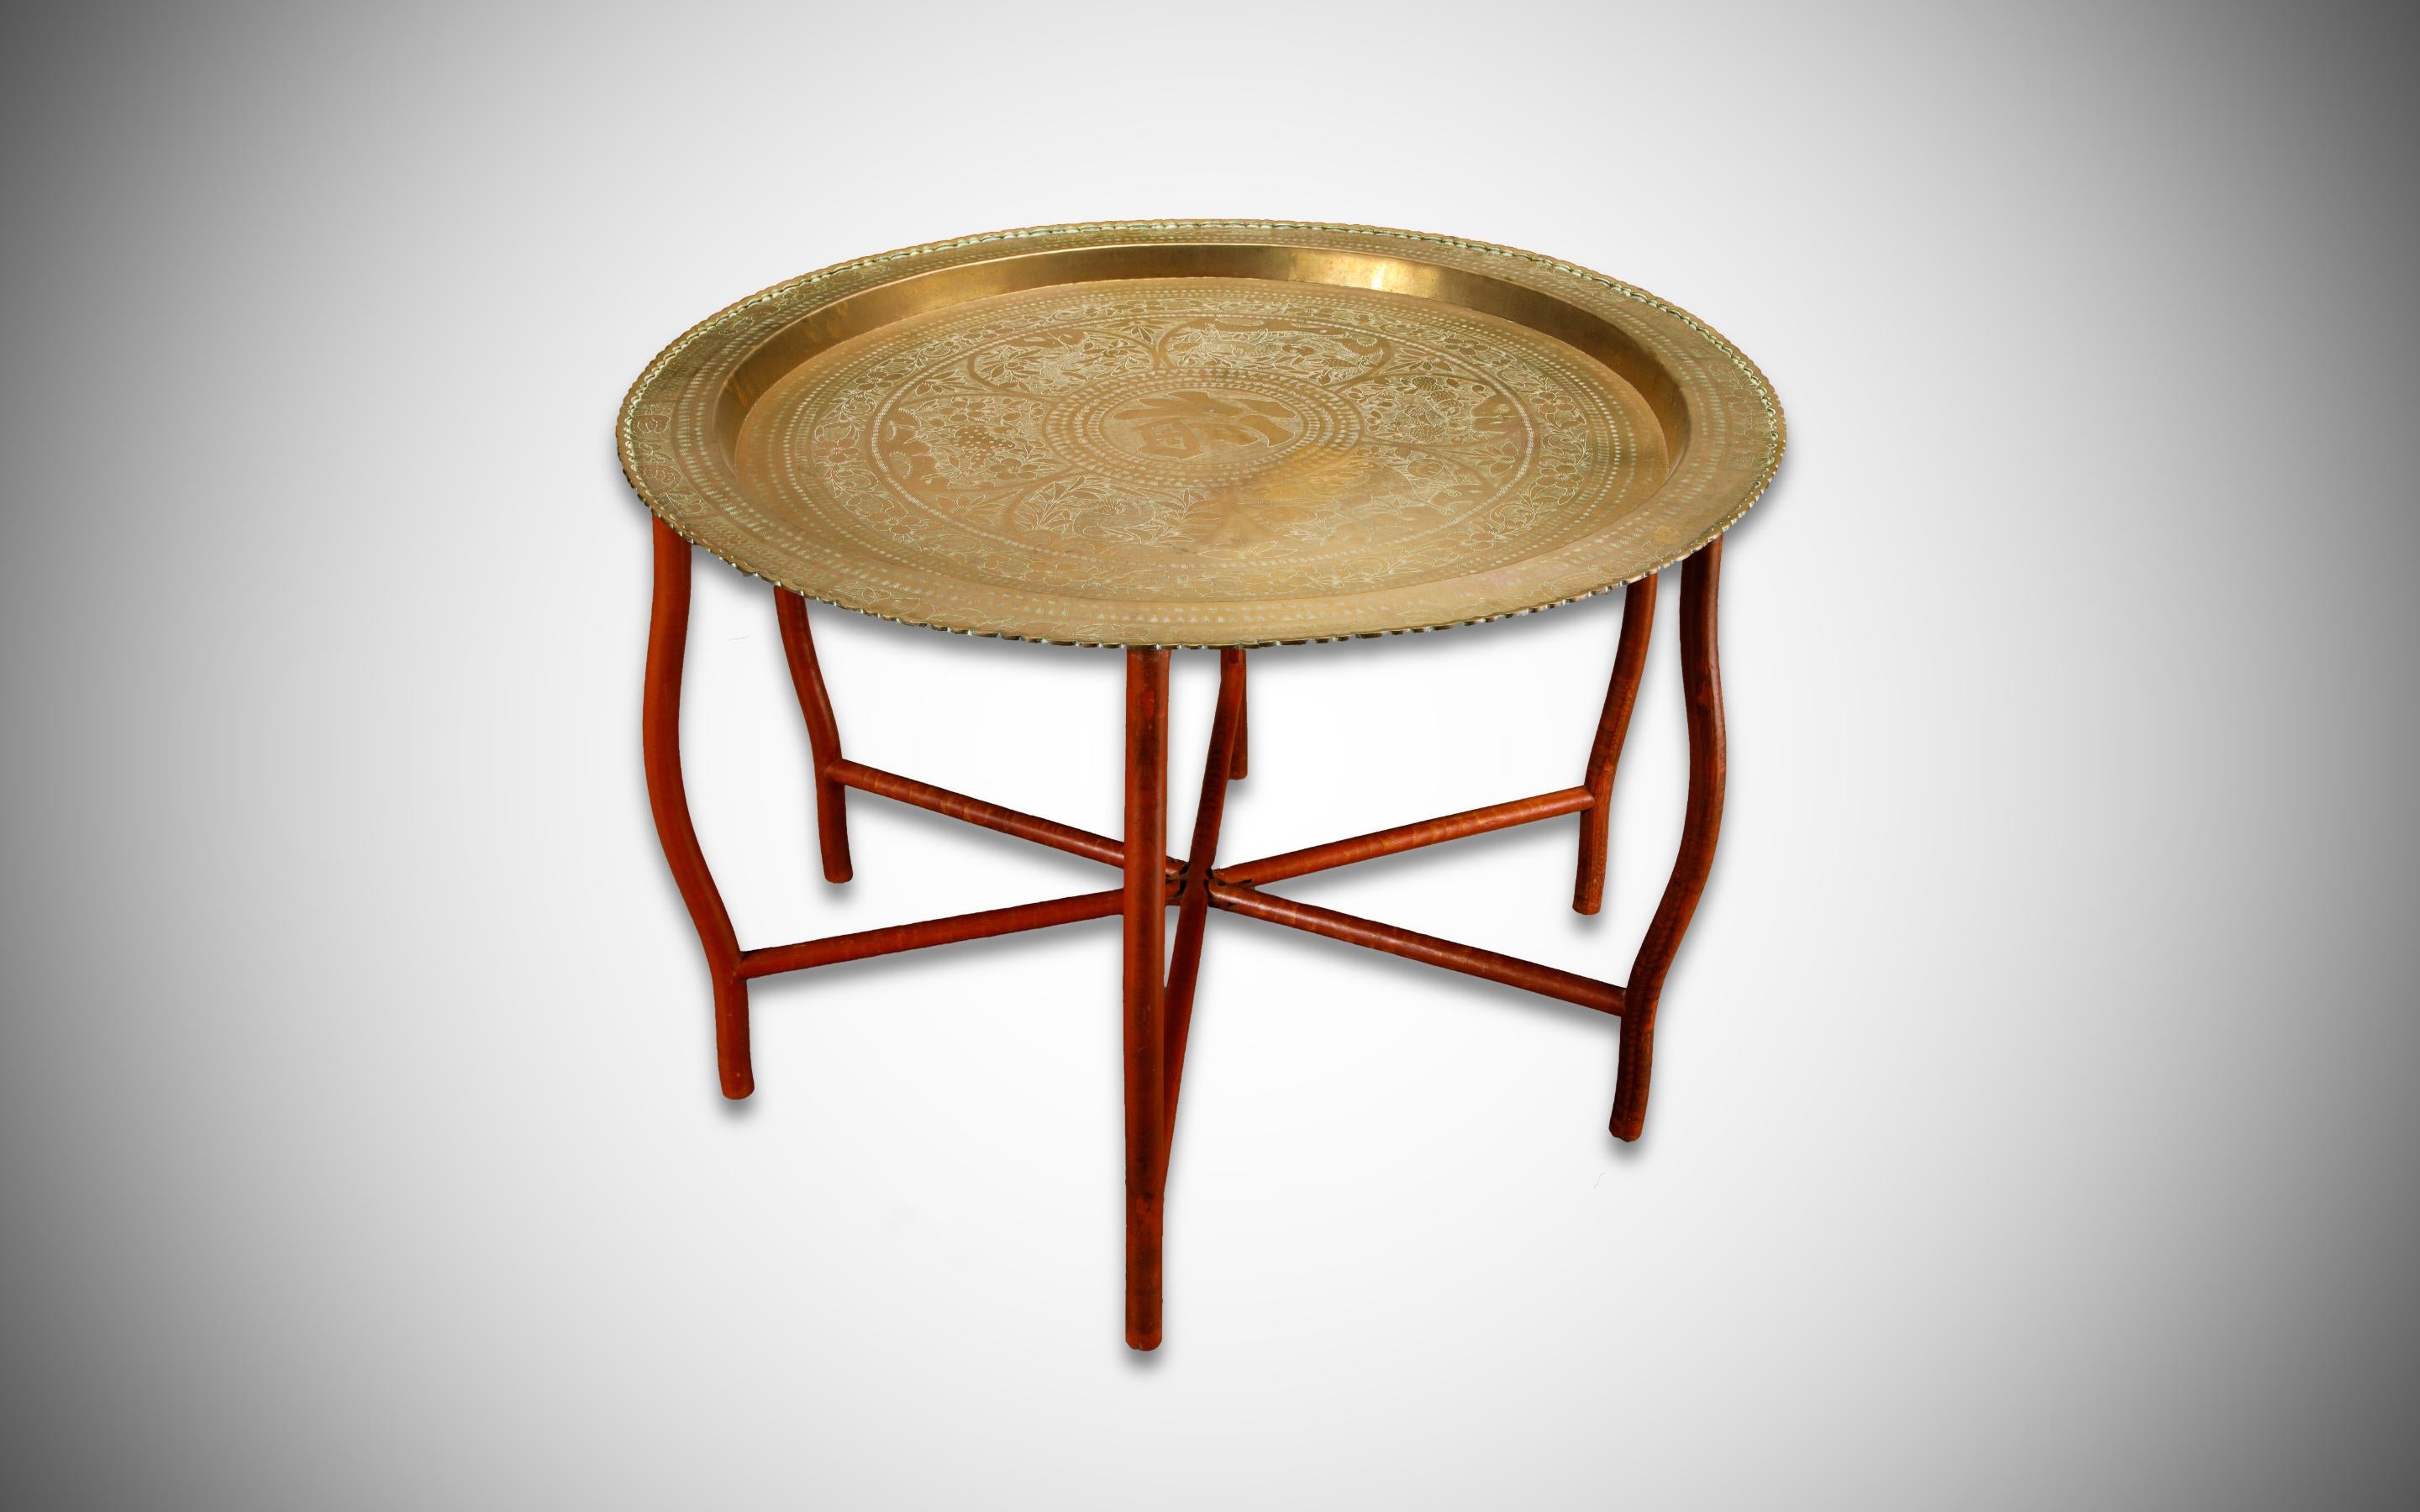 Asian Engraved and Hammered Brass Tray Table with Foldable Wood Base, c 1960s 1